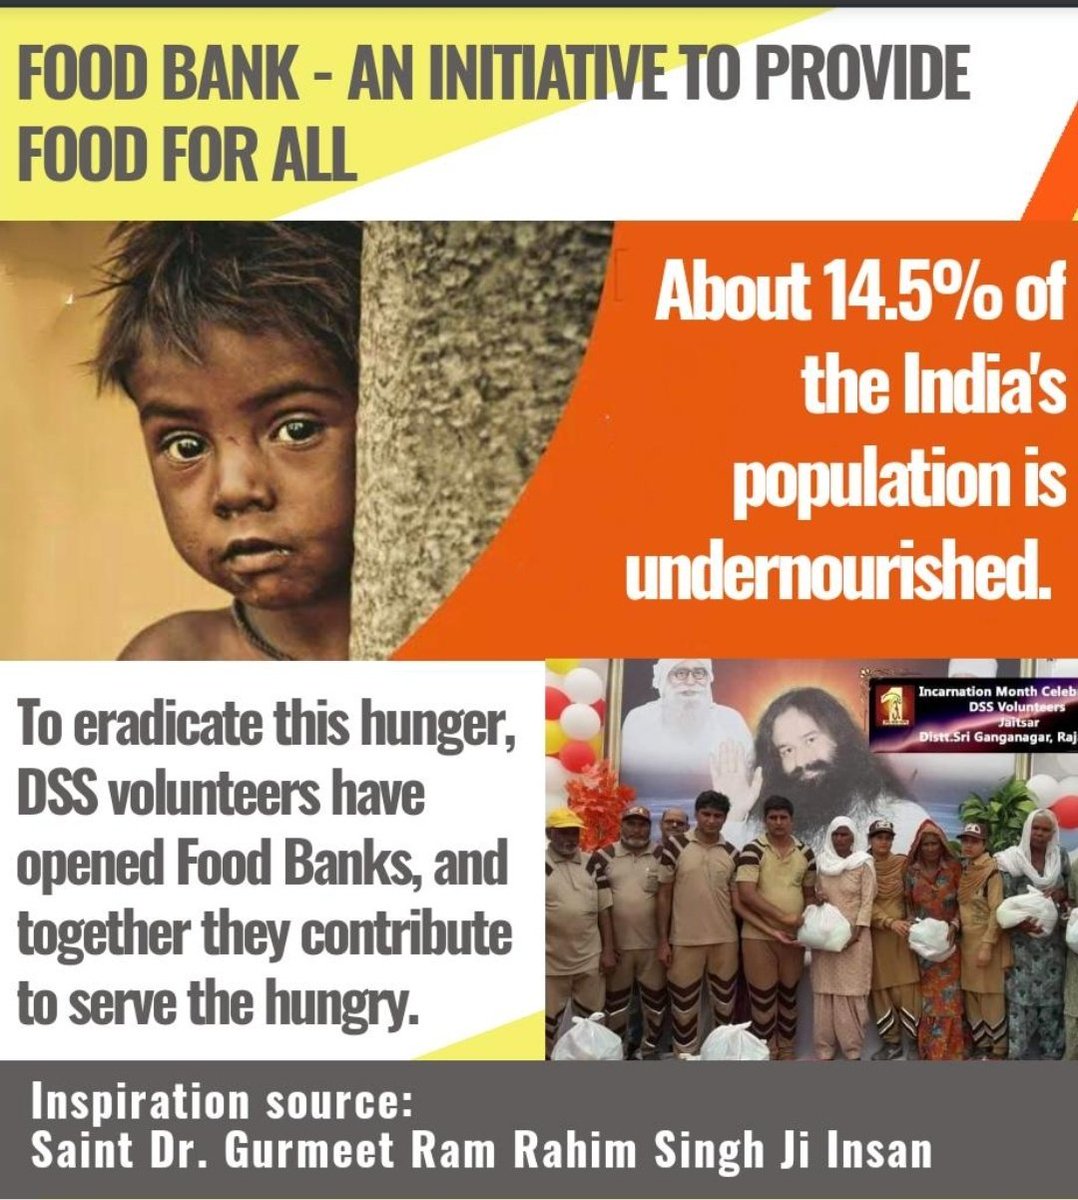 Even the basic necessity,food is out of reach of many people due to poverty. They have to suffer from starvation. To satiate their hunger,
St Dr. MSG initiated FoodBank drive. HIS followers keep fast once a week and donate that day's saved food to the needy. 
#FoodForAll